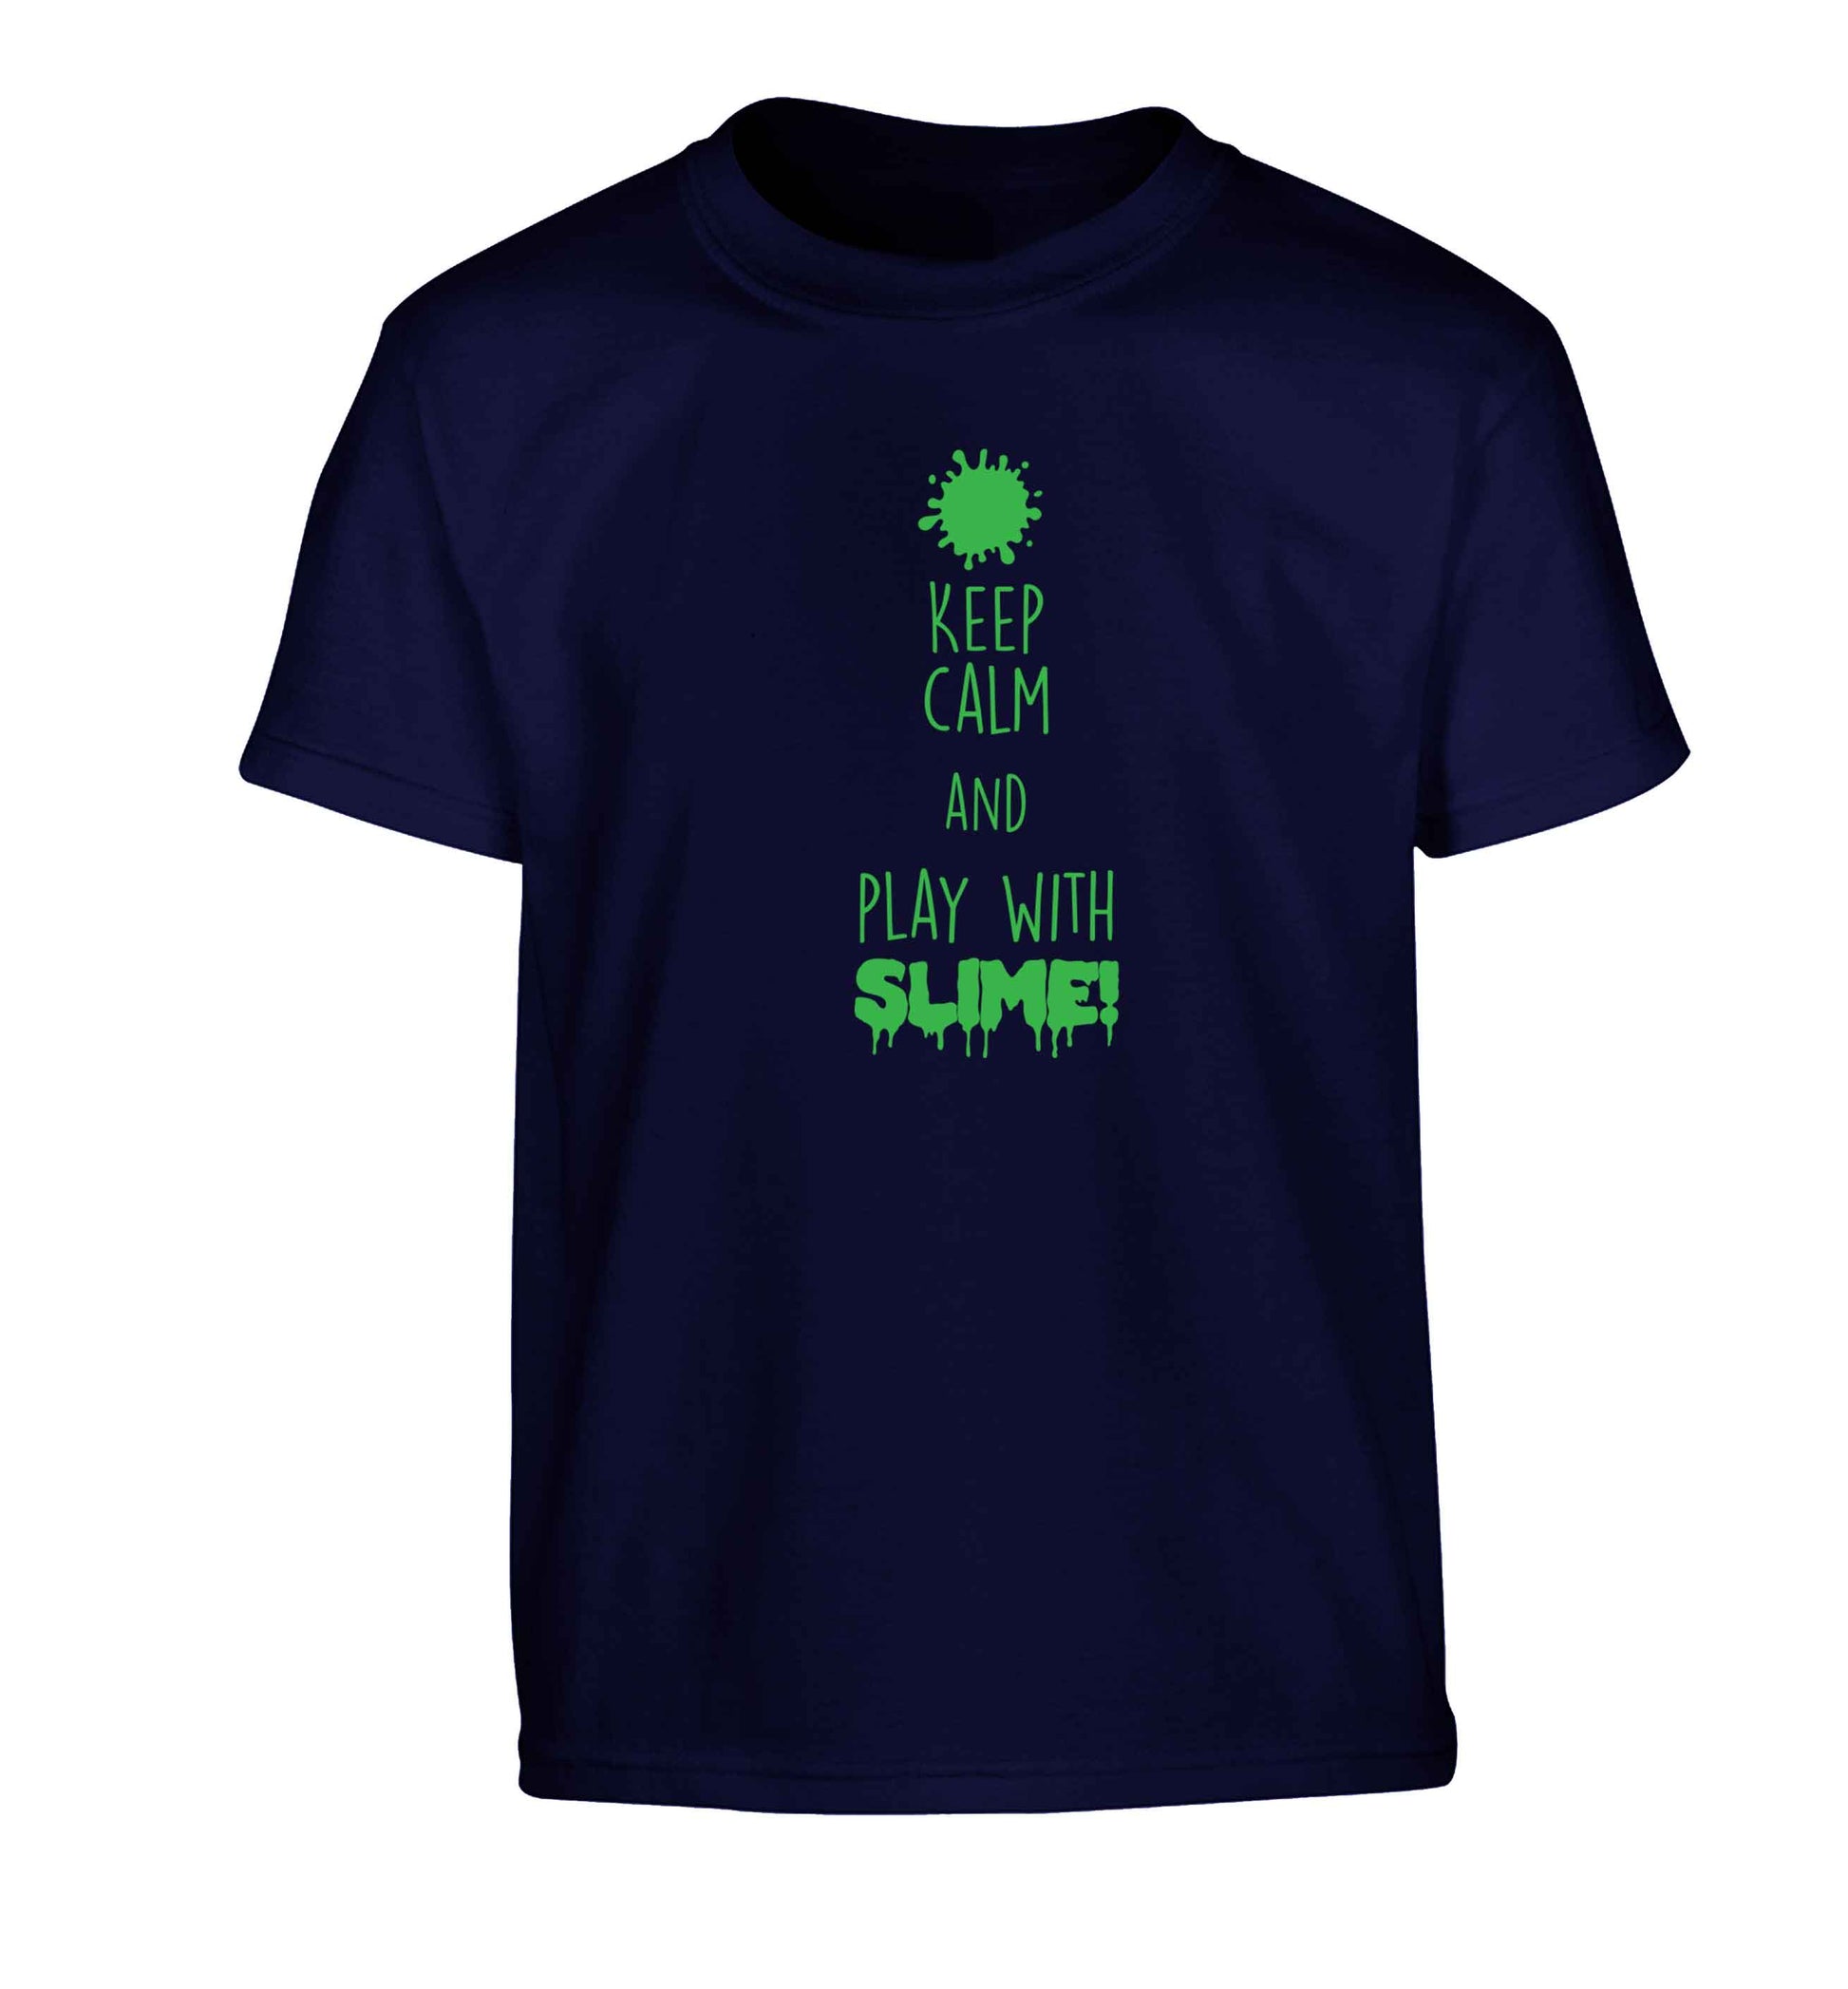 Neon green keep calm and play with slime!Children's navy Tshirt 12-13 Years